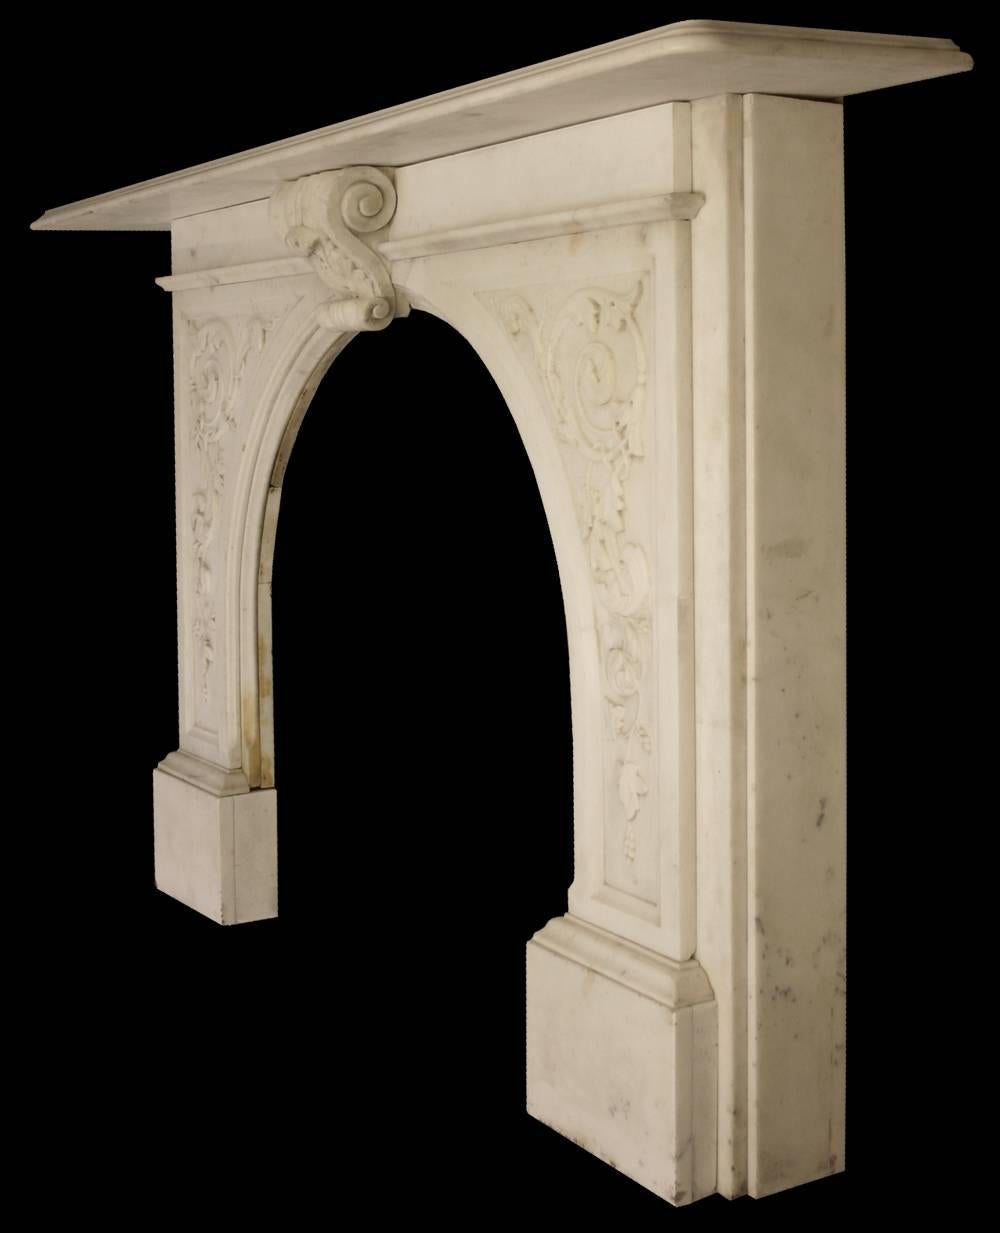 A substantial antique Victorian carved statuary marble fireplace surround with arched aperture. Each leg is well carved with acanthus scrolls, so too is the large keystone.

Images prior to restoration. This chimneypiece is awaiting restoration.